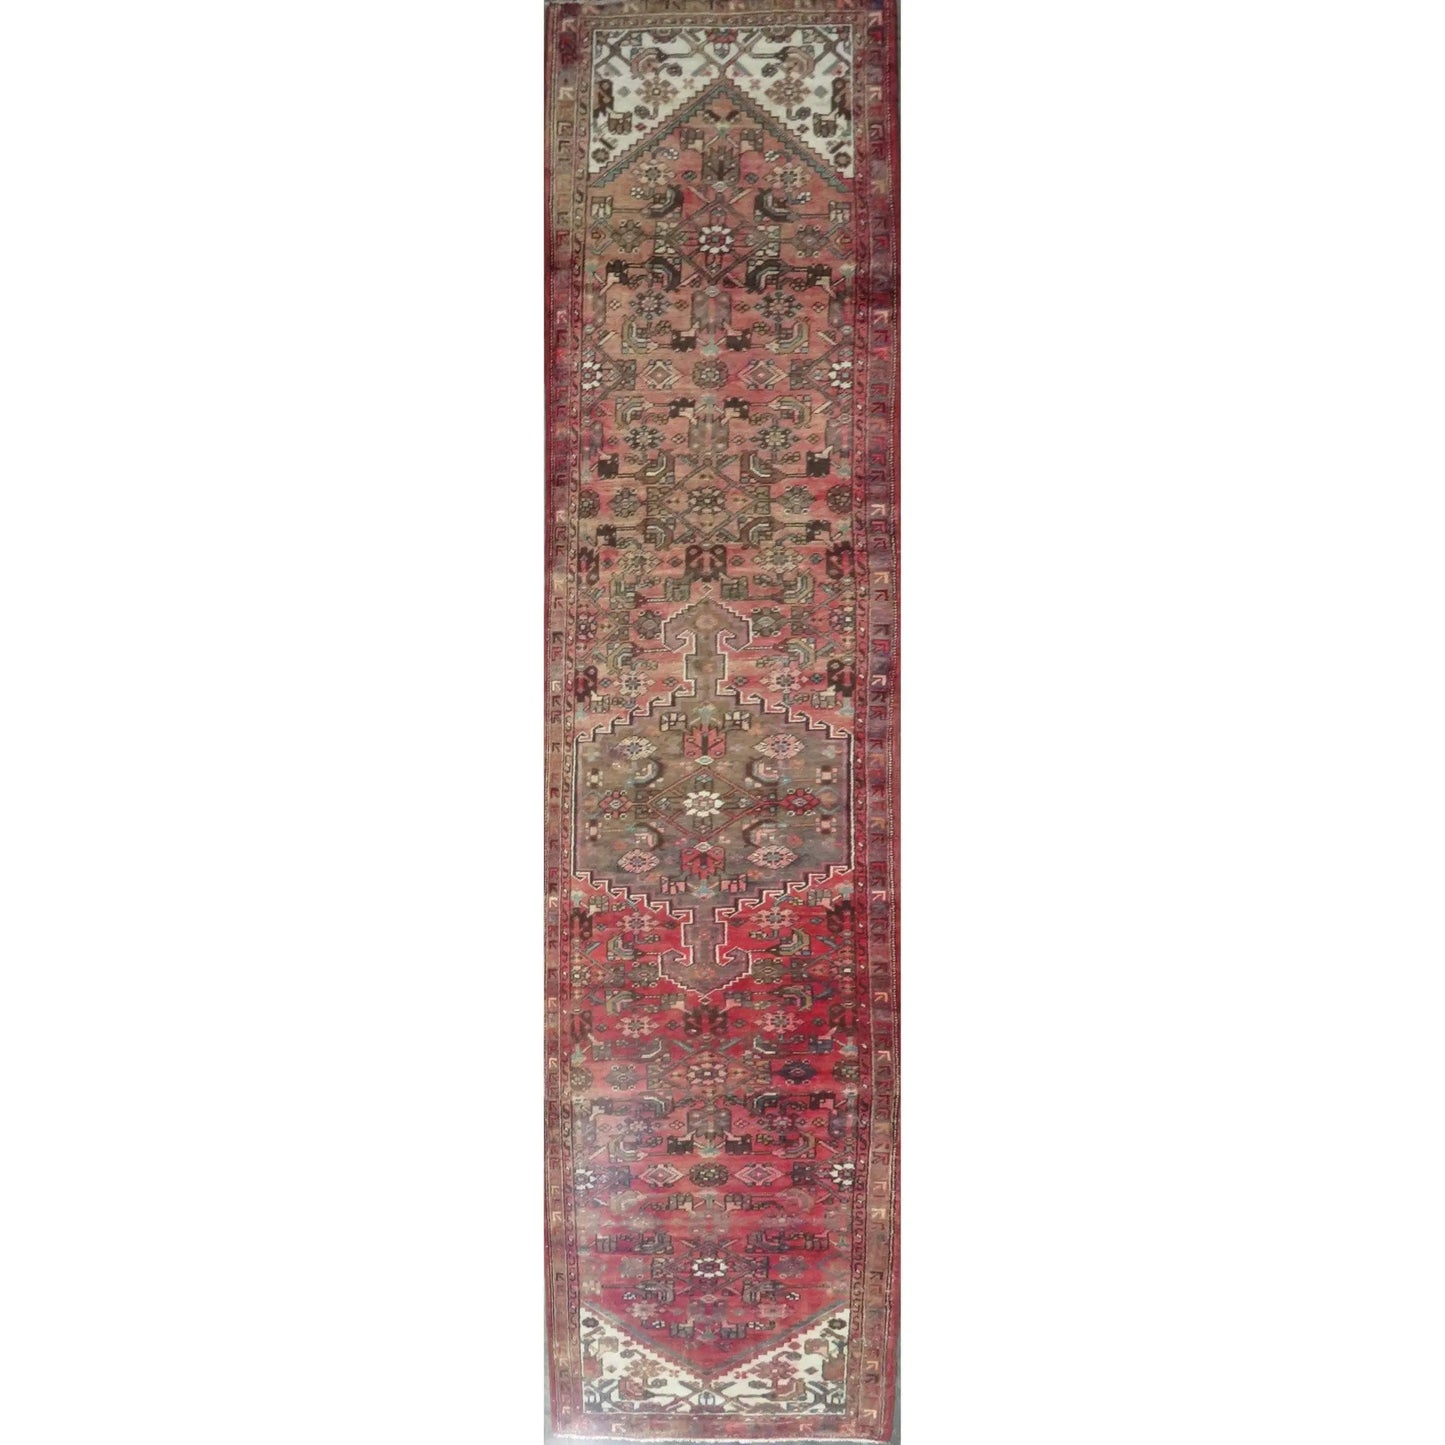 Hand-Knotted Persian Wool Rug _ Luxurious Vintage Design, 13'5" x 2'9", Artisan Crafted